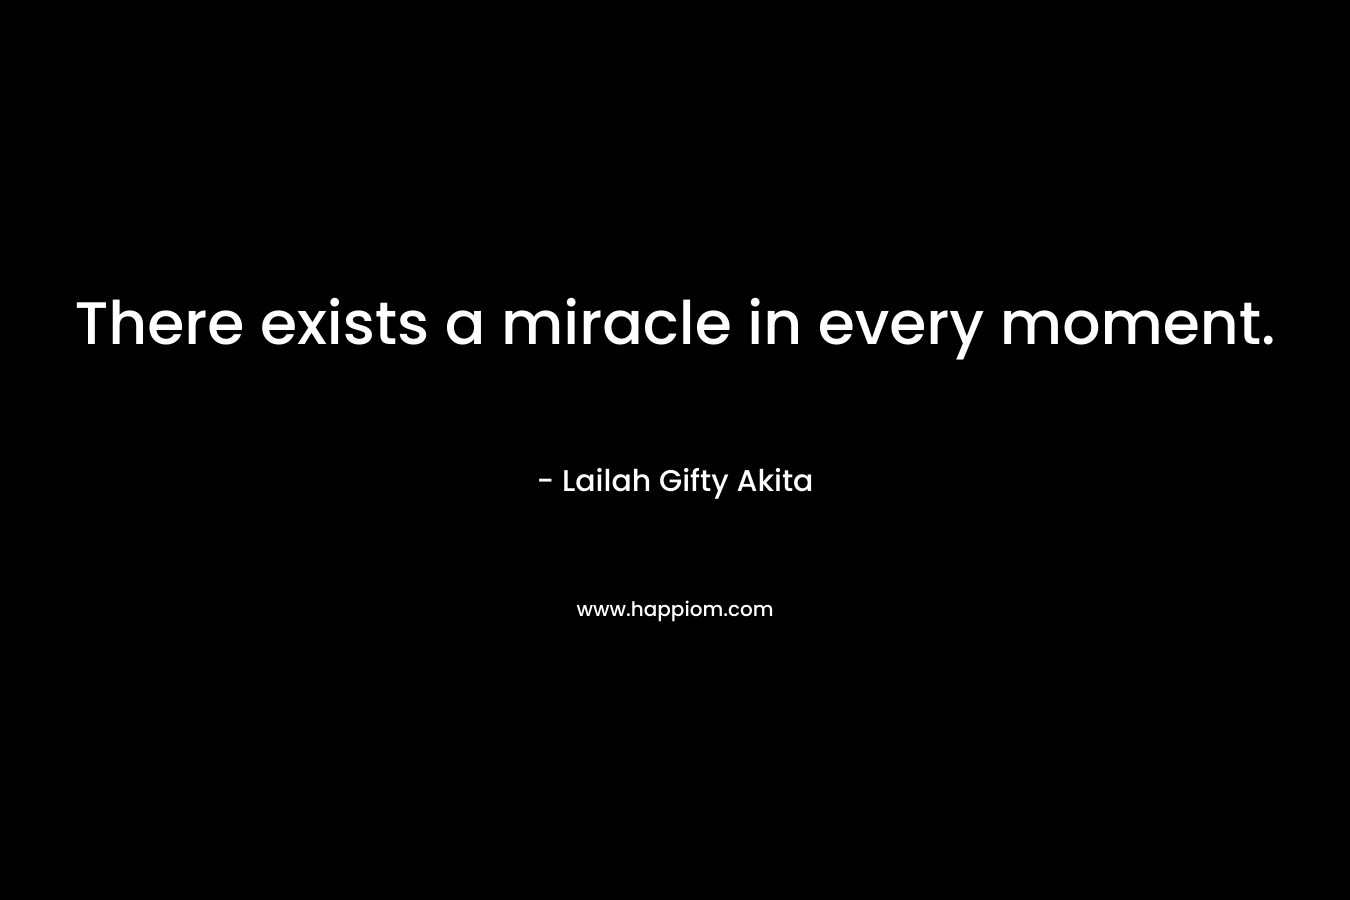 There exists a miracle in every moment.